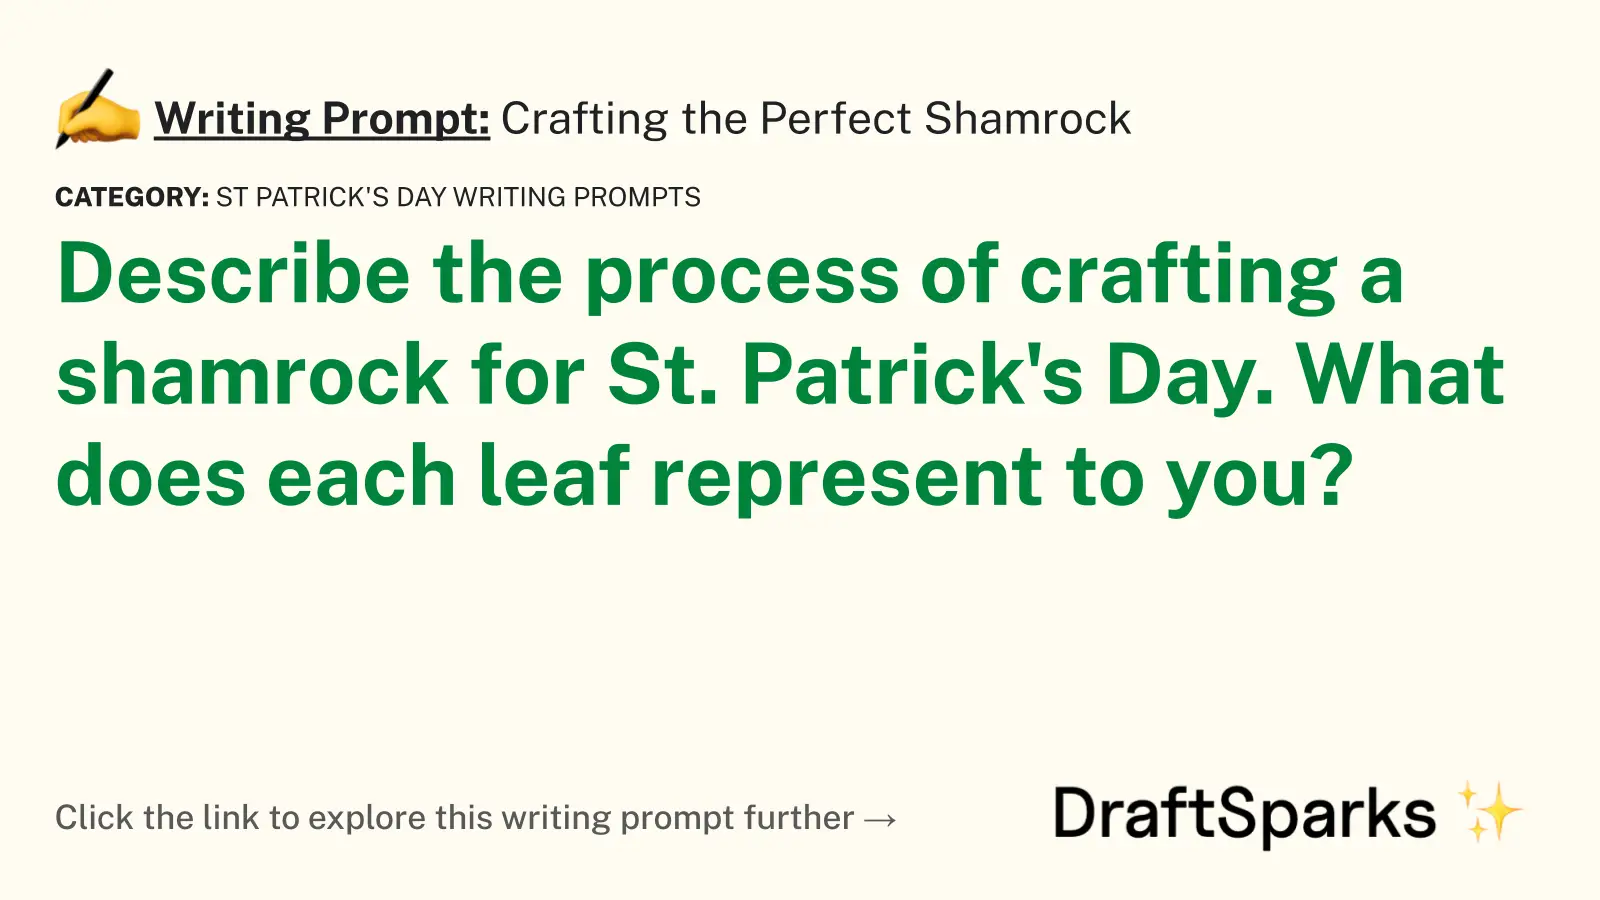 Crafting the Perfect Shamrock